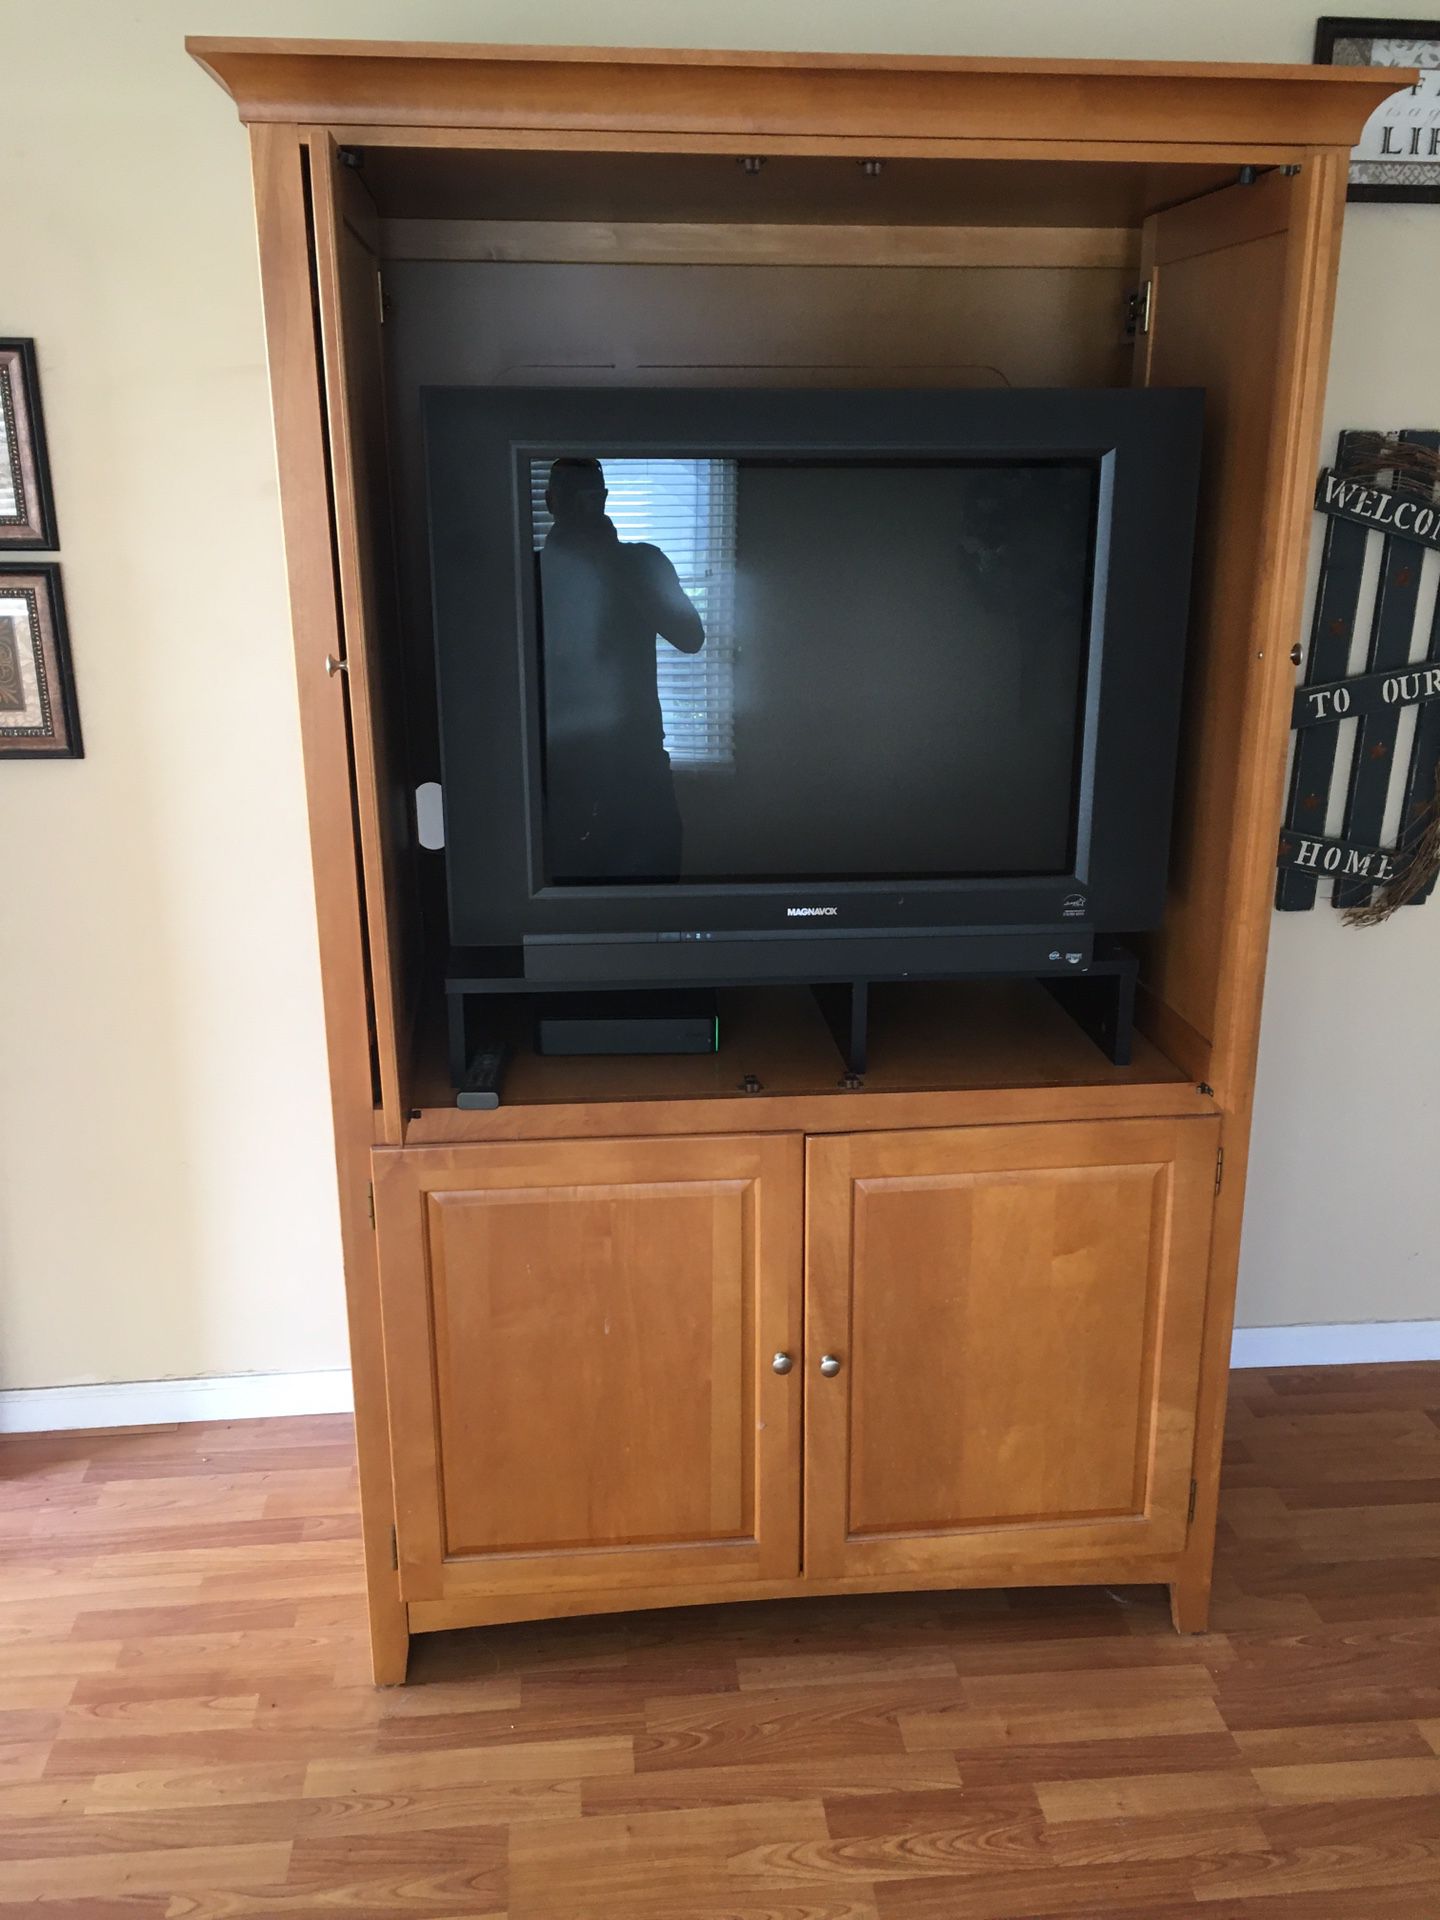 Tv and stand. Excellent condition